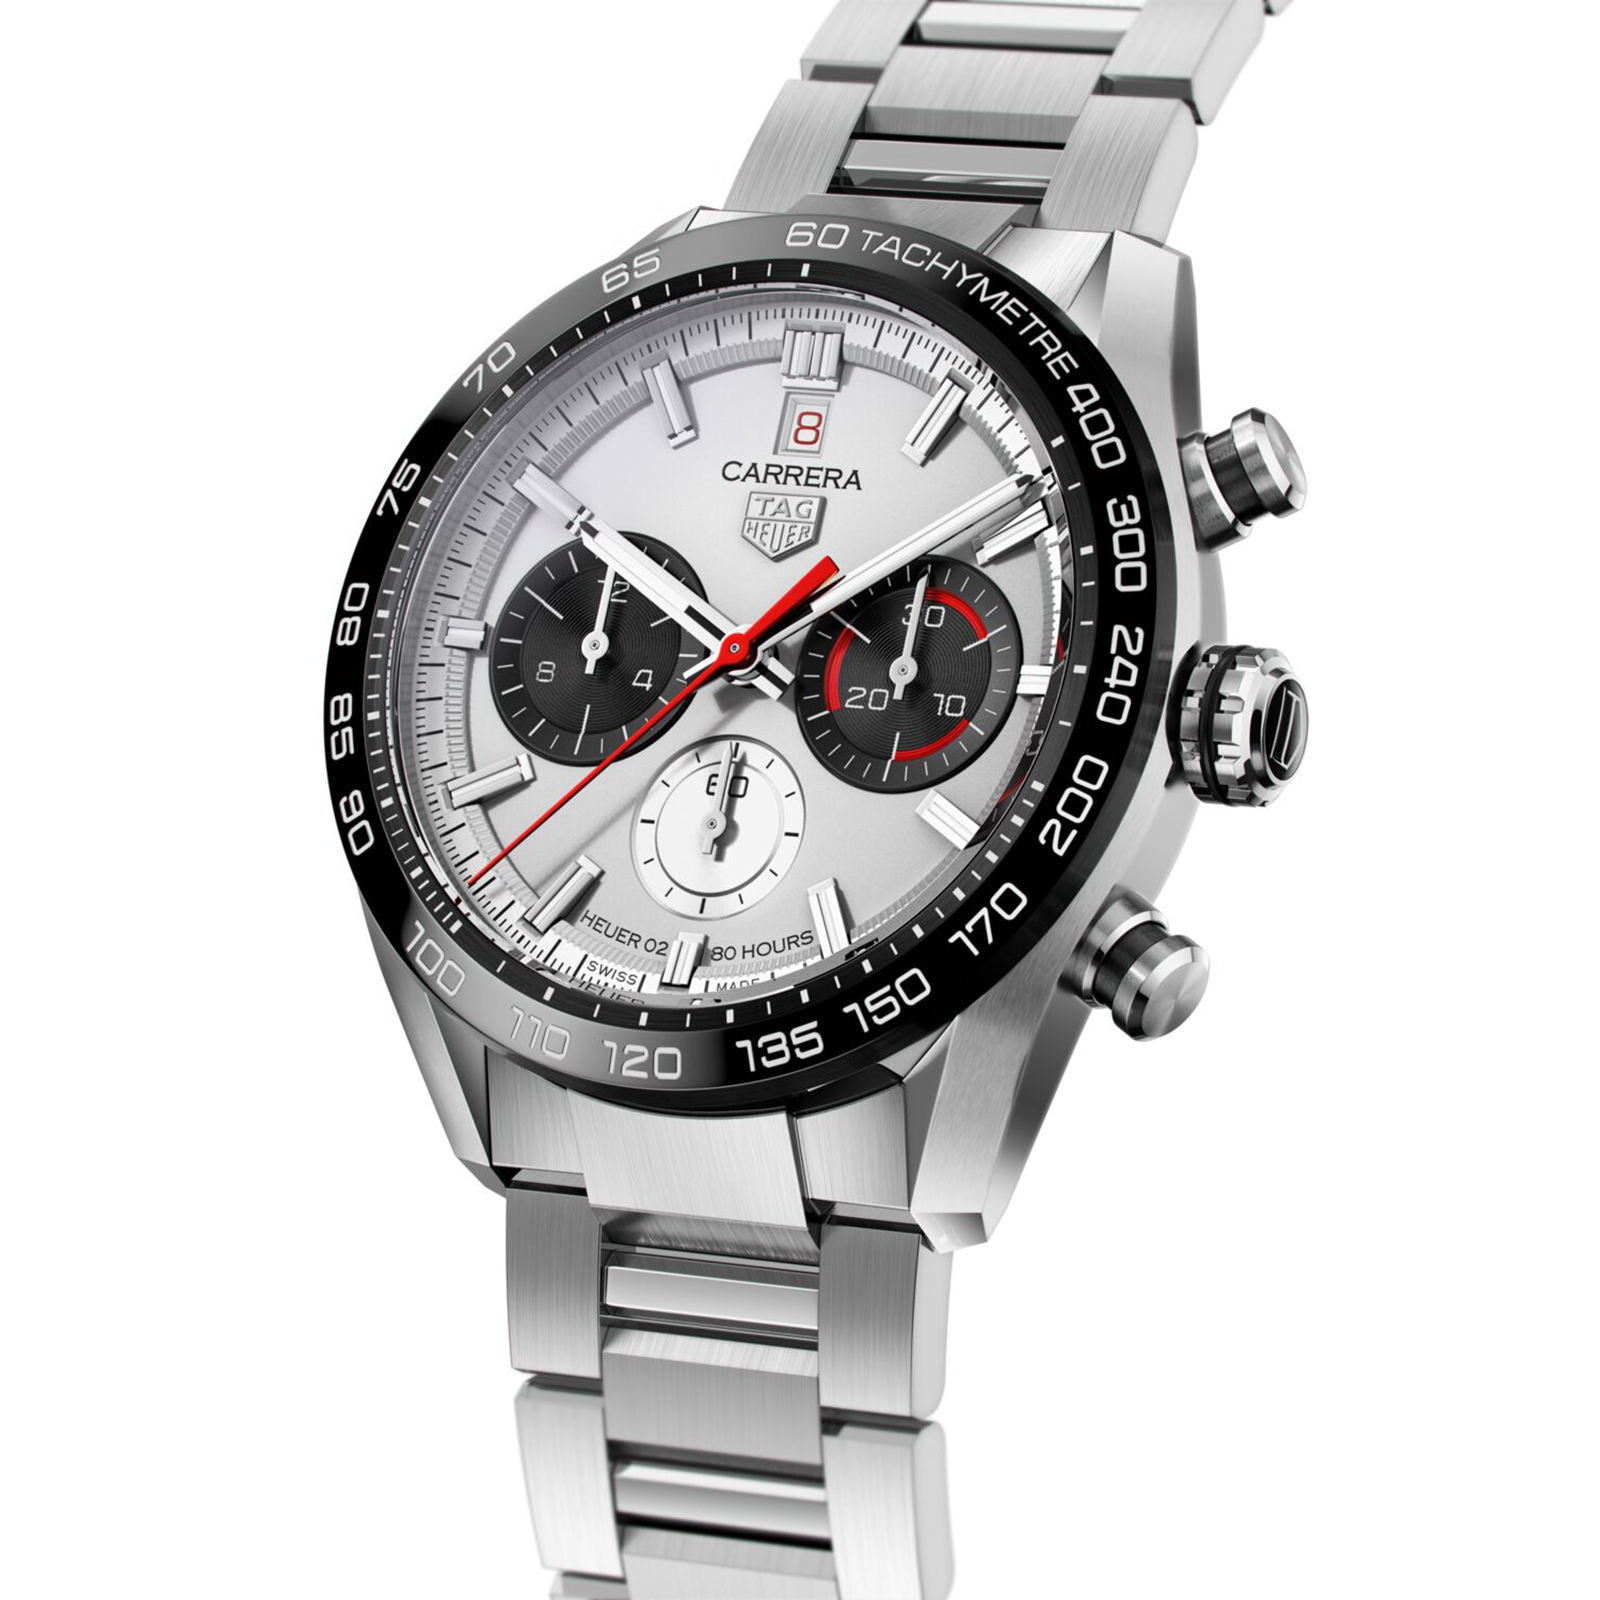 Swiss TAG Heuer 160th Anniversary Limited Edition Carrera 44mm Mens Watch CBN2A1D.BA0643